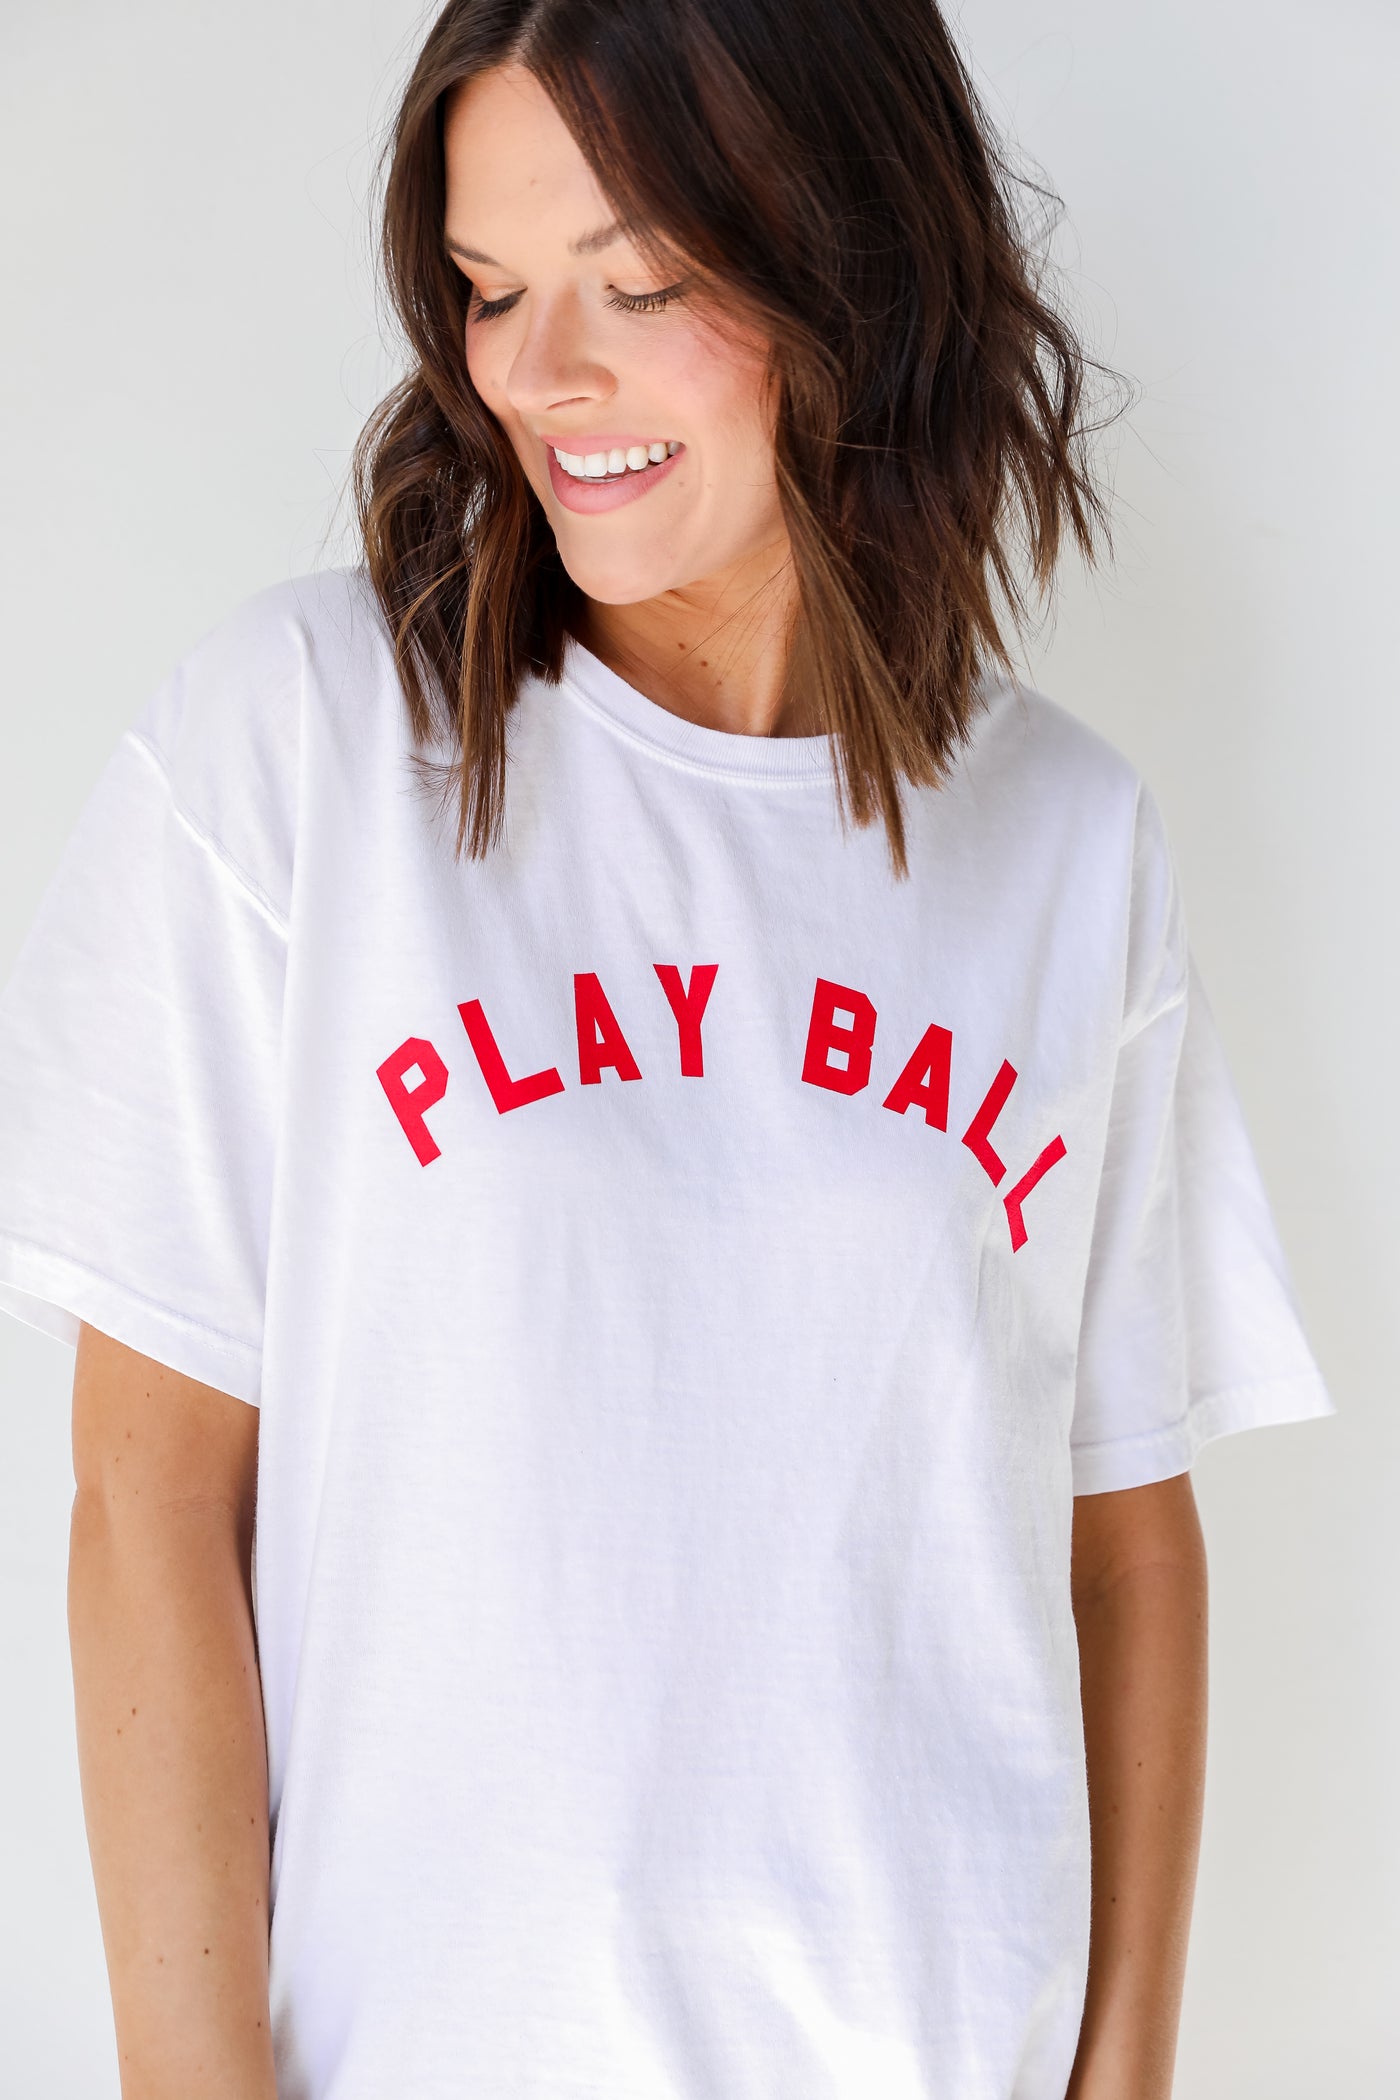 Red Play Ball Tee from dress up